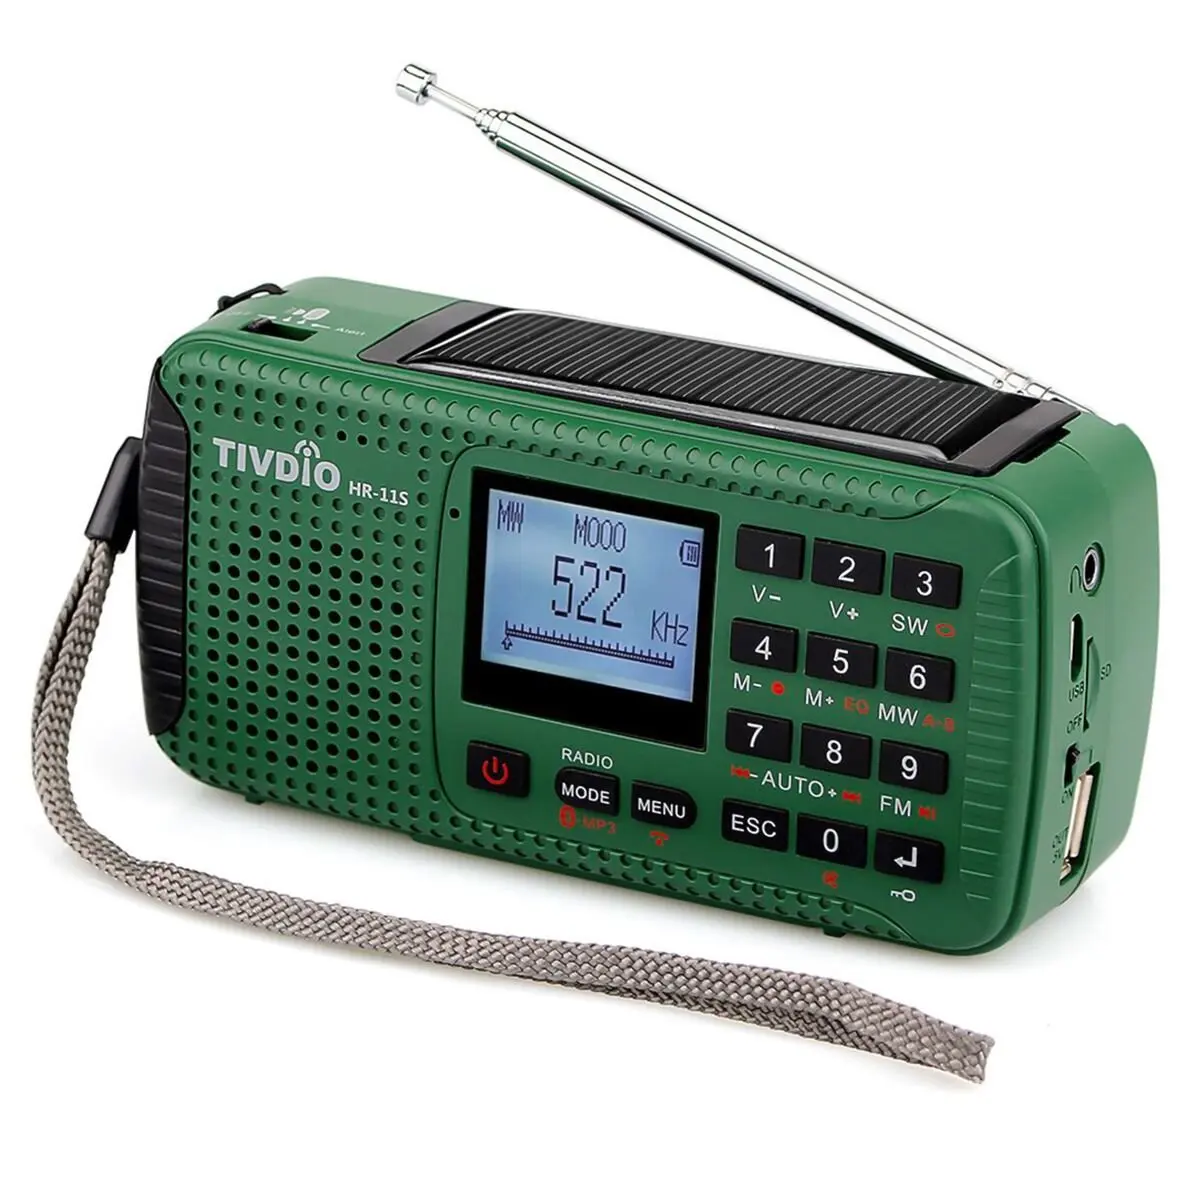 Buy Tivdio Hr 11s Emergency Radio With Am Fm Shortwave Radio Camping Dynamo Radio Solar Outdoor Wind Up With Sos Flashlight Wireless Mp3 Player Speaker And Recorder Alarm Clock Dsp Green In Cheap Price